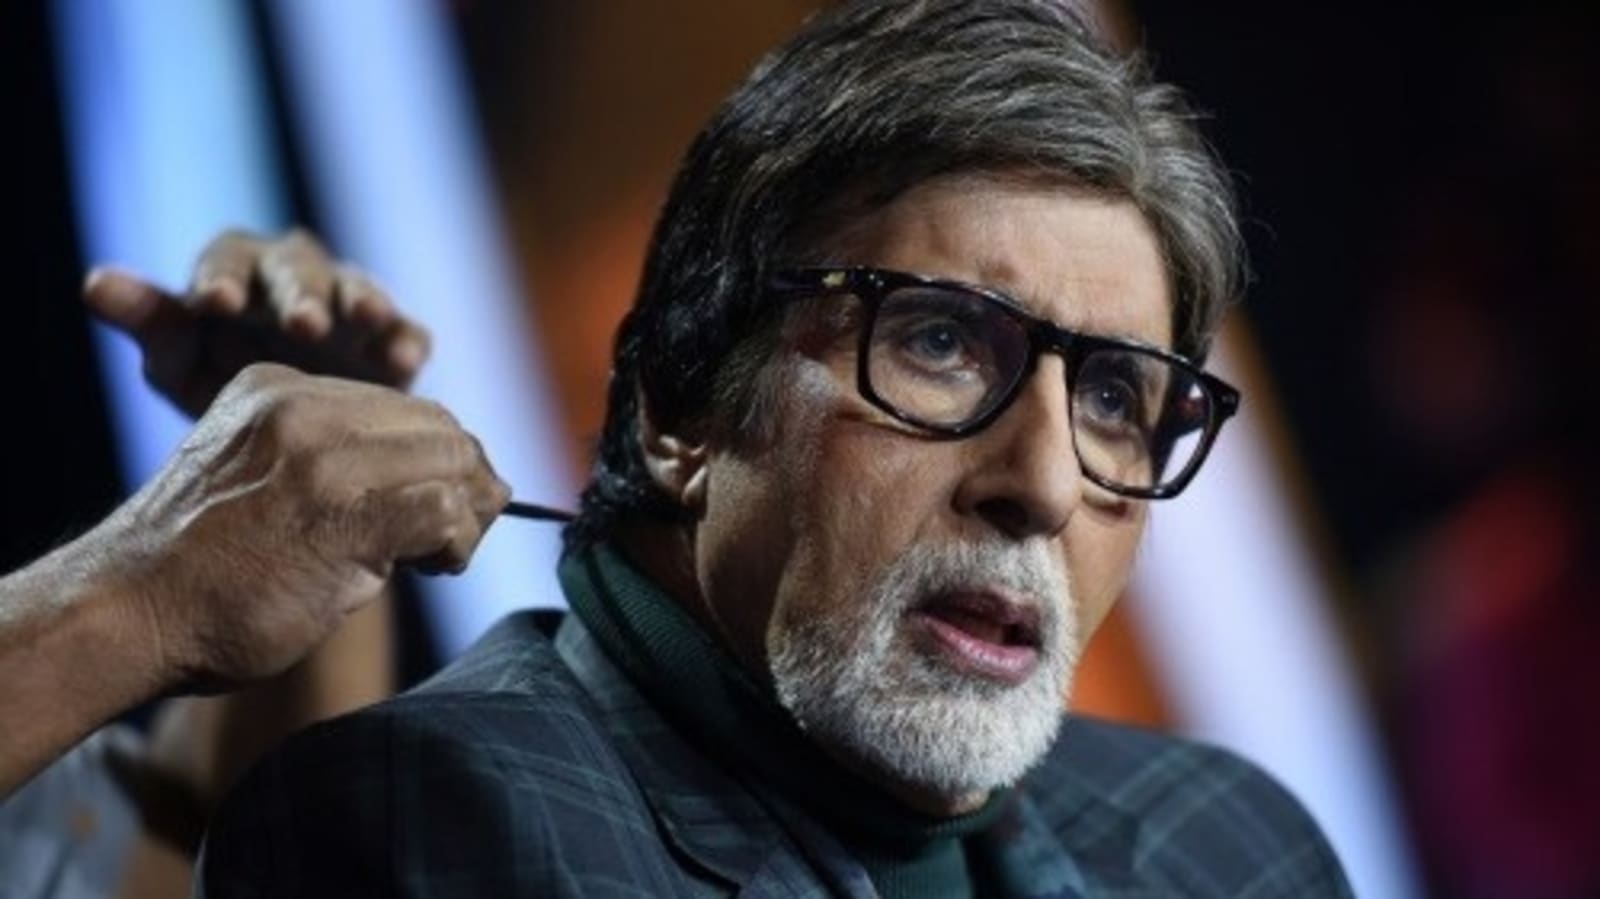 amitabh-bachchan-opens-up-about-getting-covid-19-again-to-say-that-i-m-disappointed-would-be-an-understatement